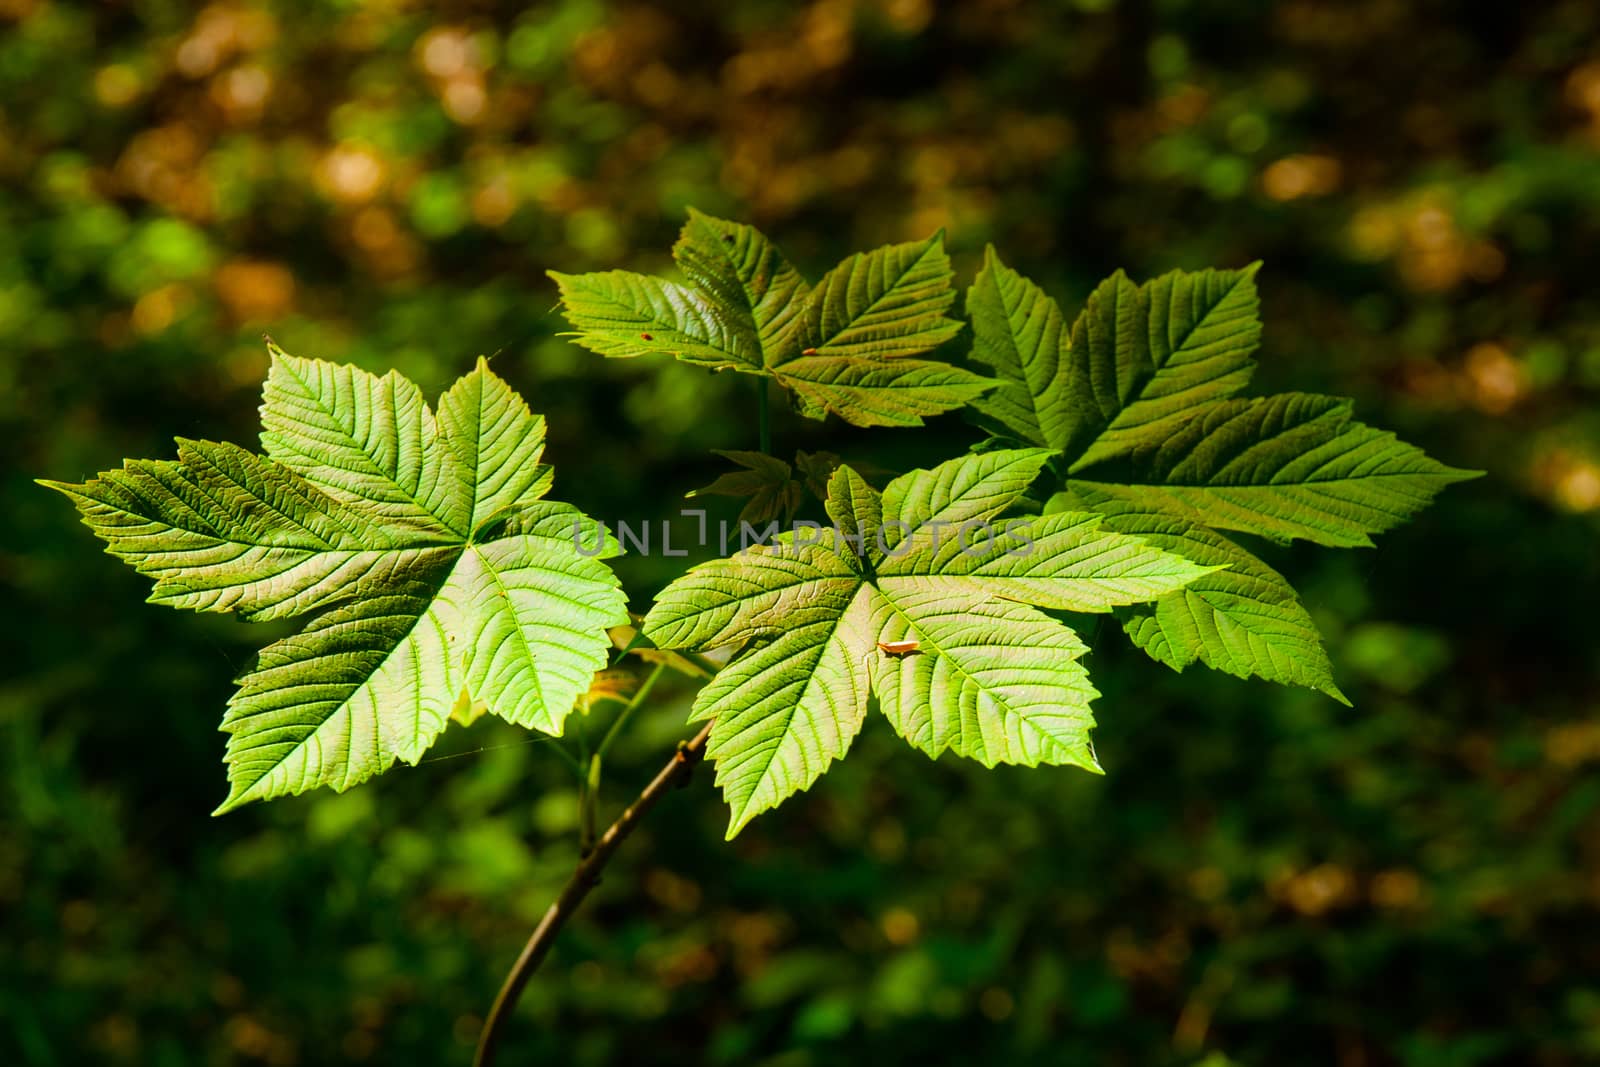 Group of maple leafs illuminated by sun in the dark forest.